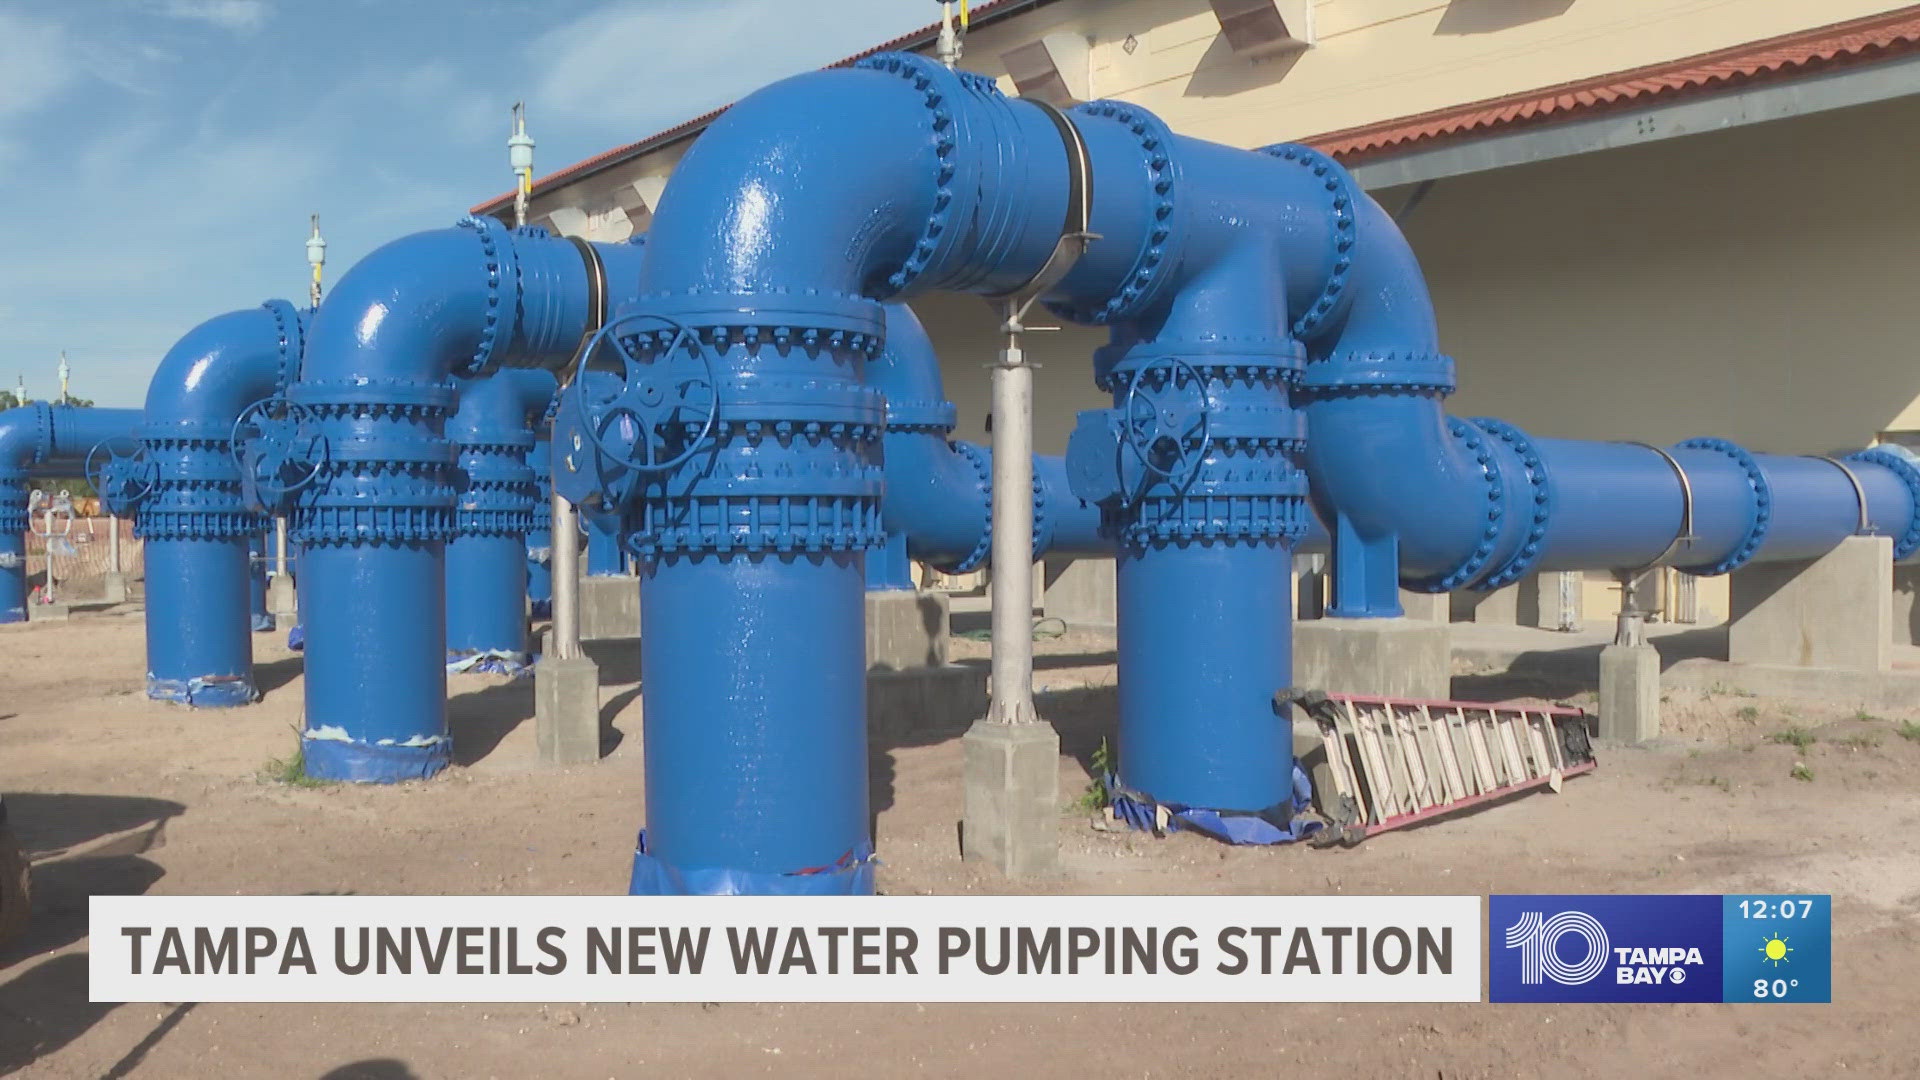 The new pump station is designed to treat more water in less time and improve quality.